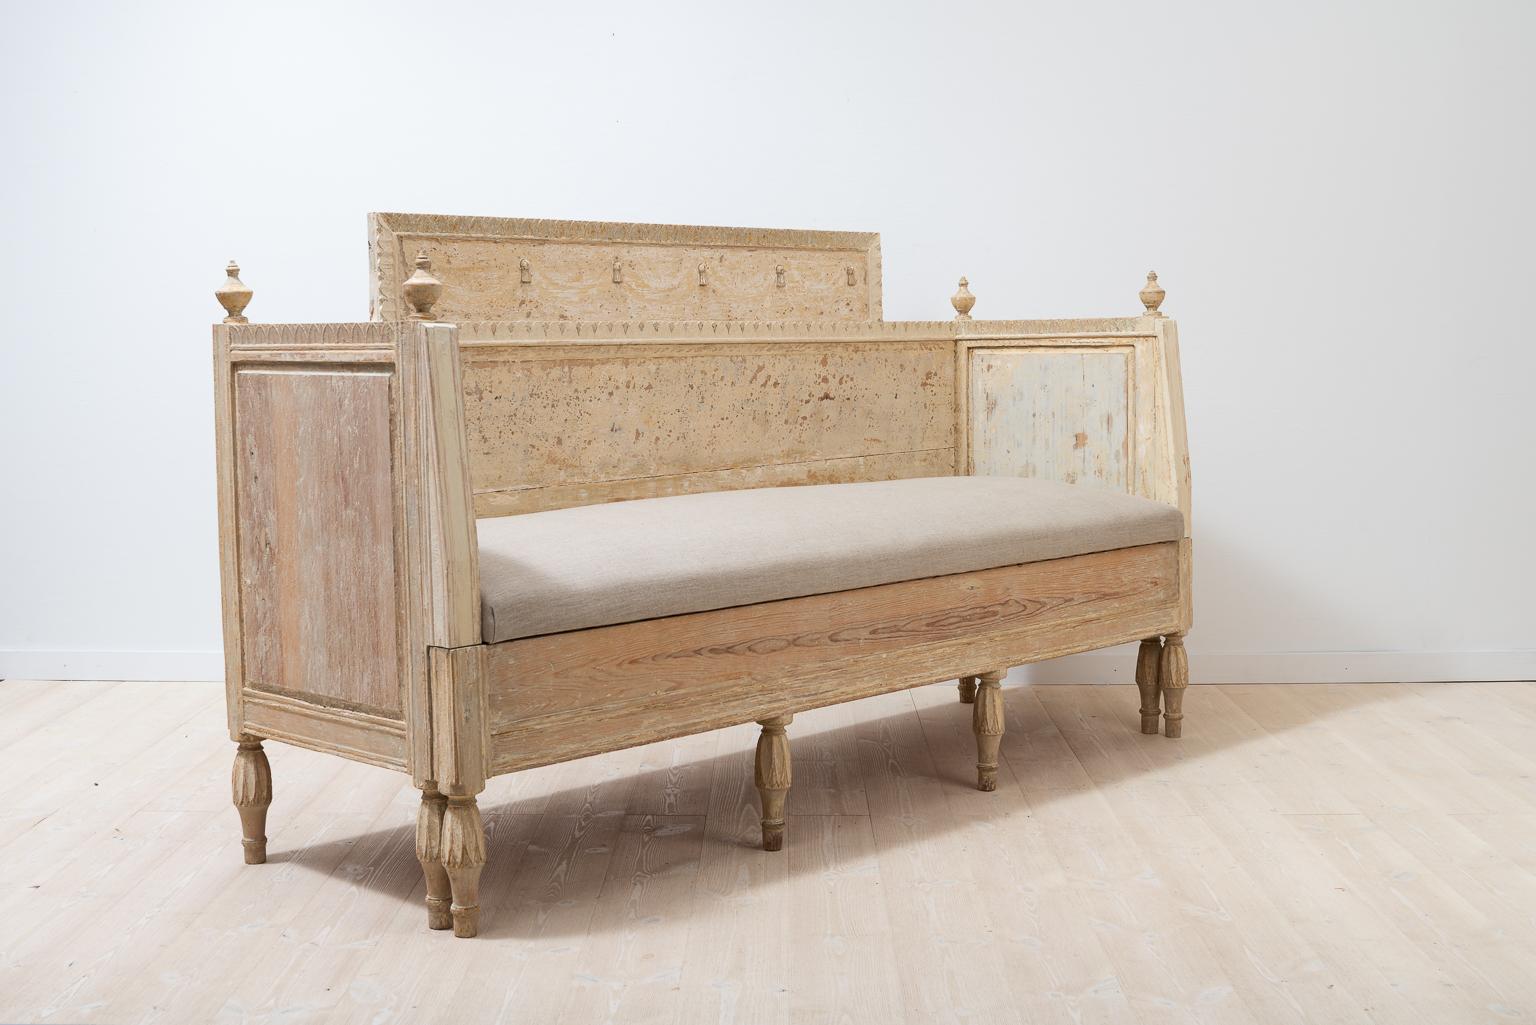 Hand-Painted Swedish Gustavian Sofa from the Late 18th Century